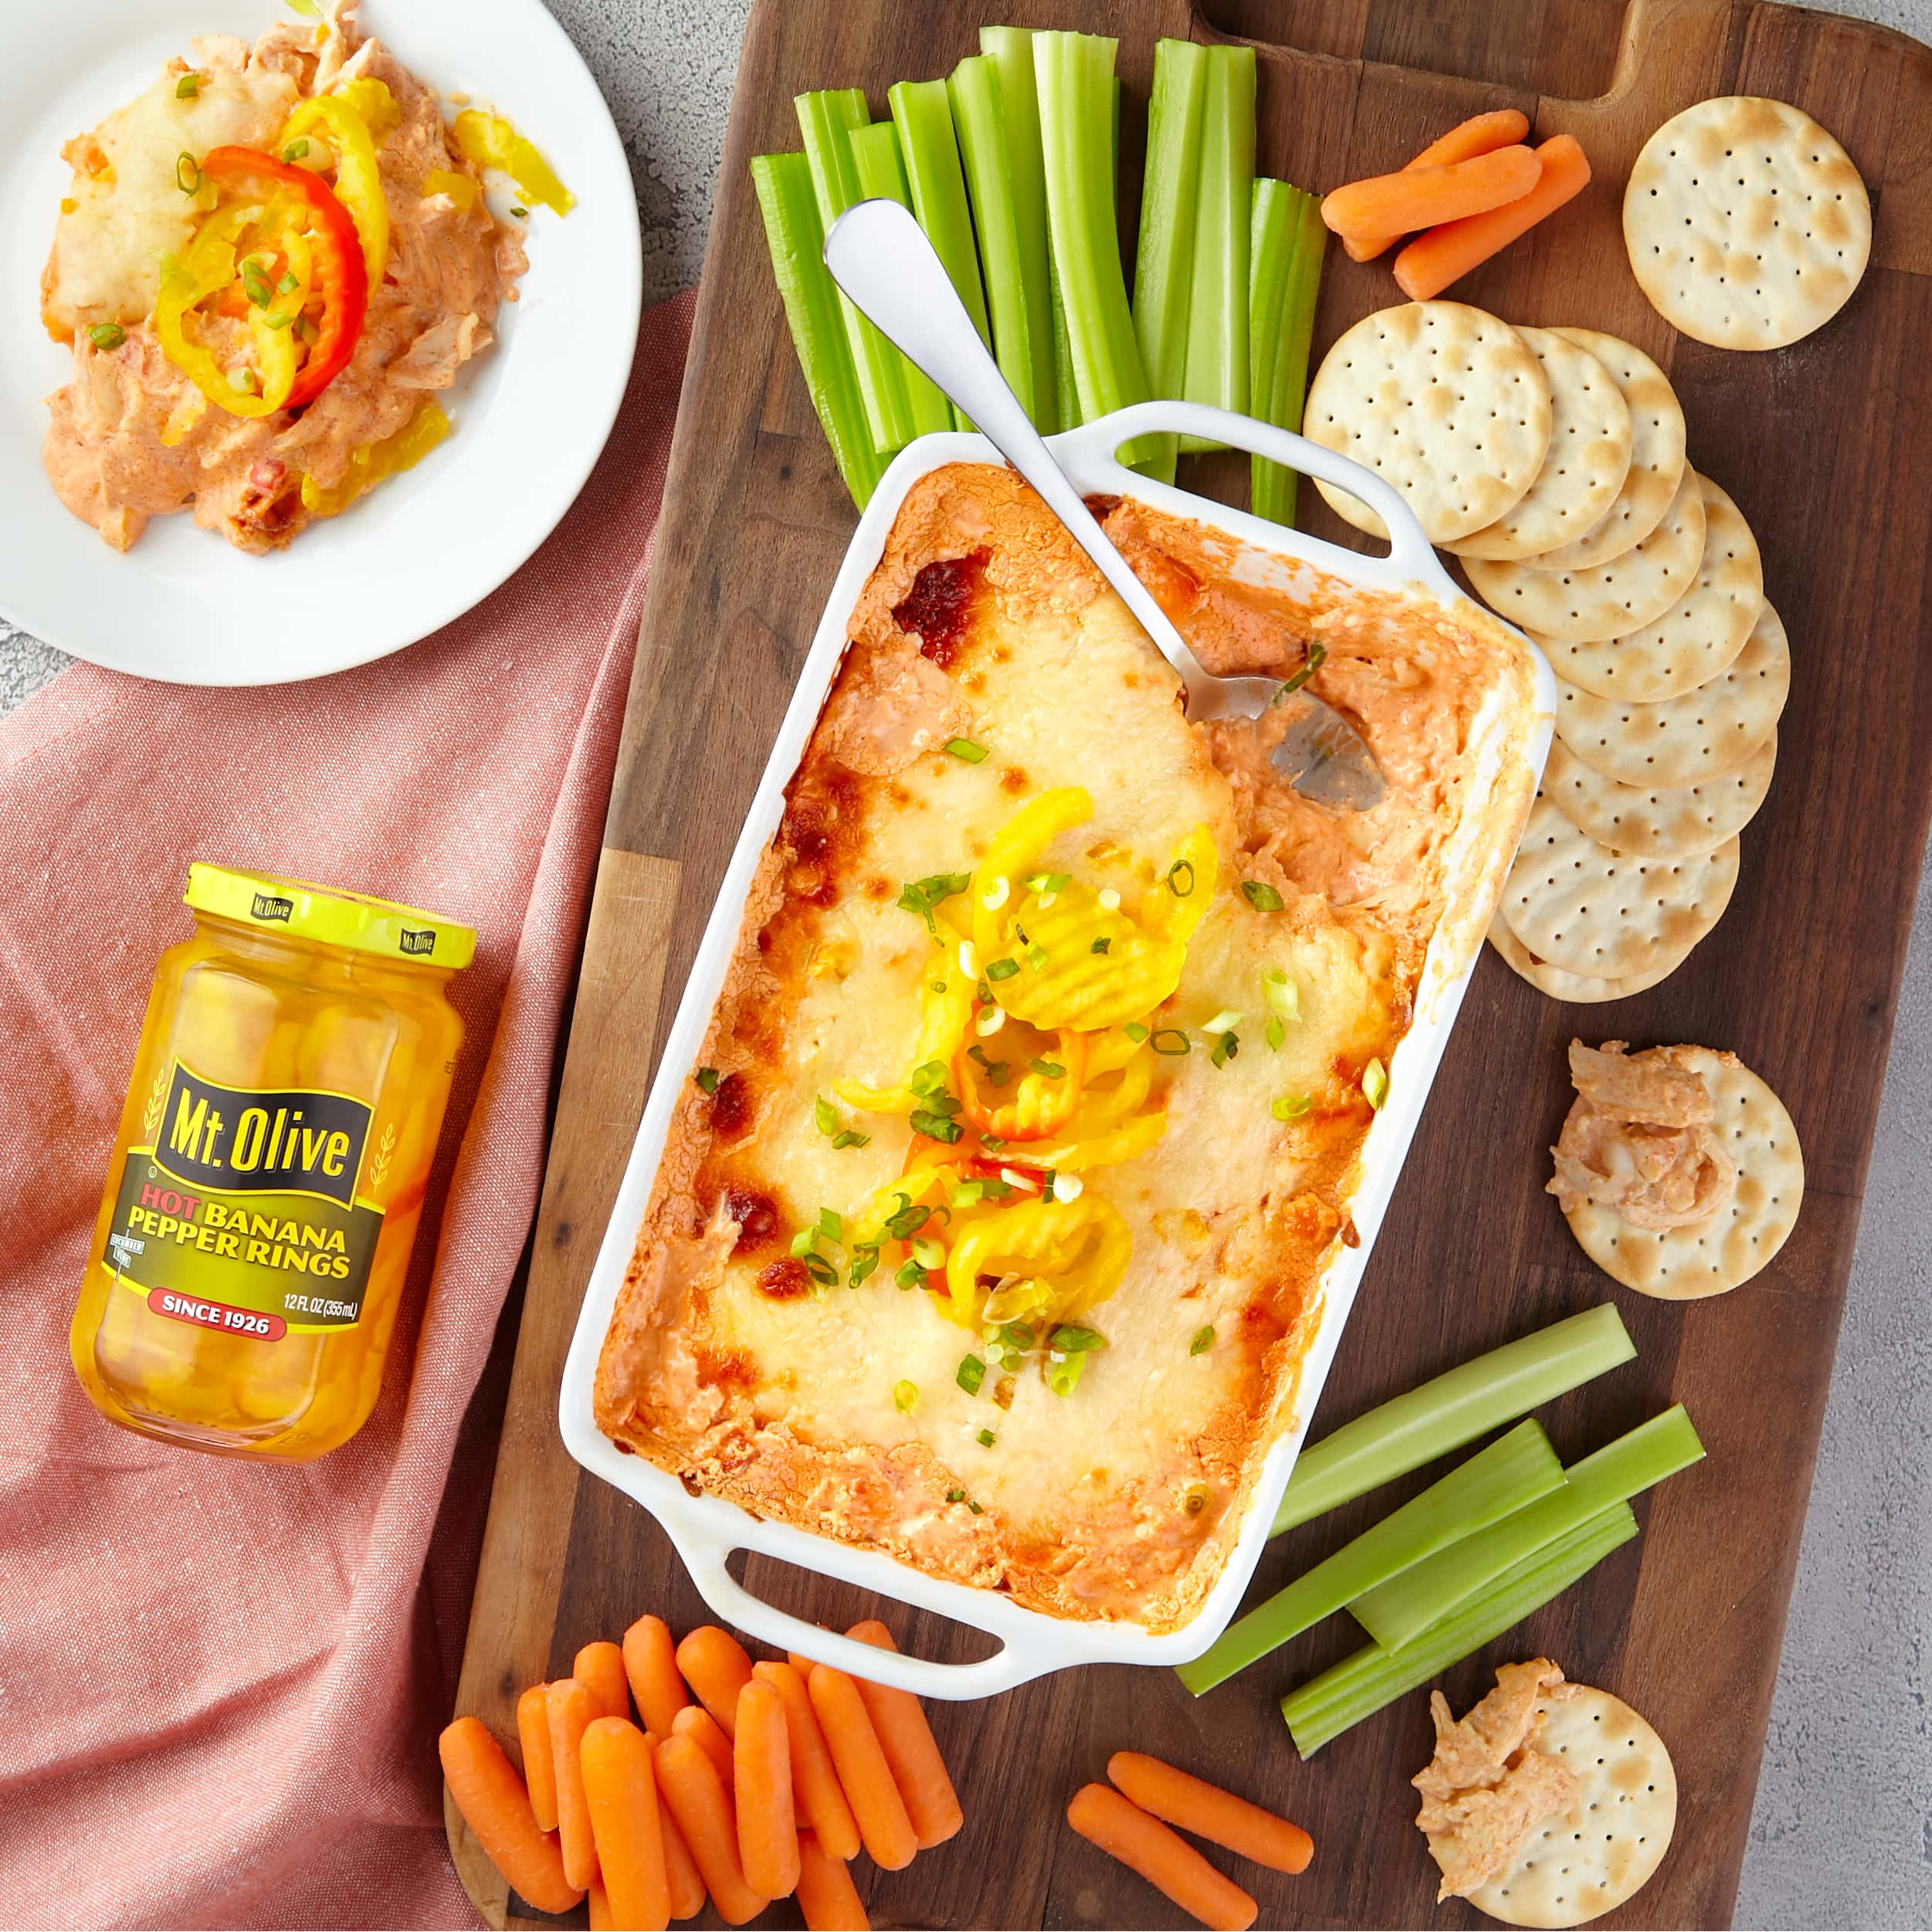 wood cutting board with celery and carrots and crackers. White dish on top with buffalo chicken dip topped with cheese and banana peppers. Shown next to it is a jar of Hot Banana Peppers.